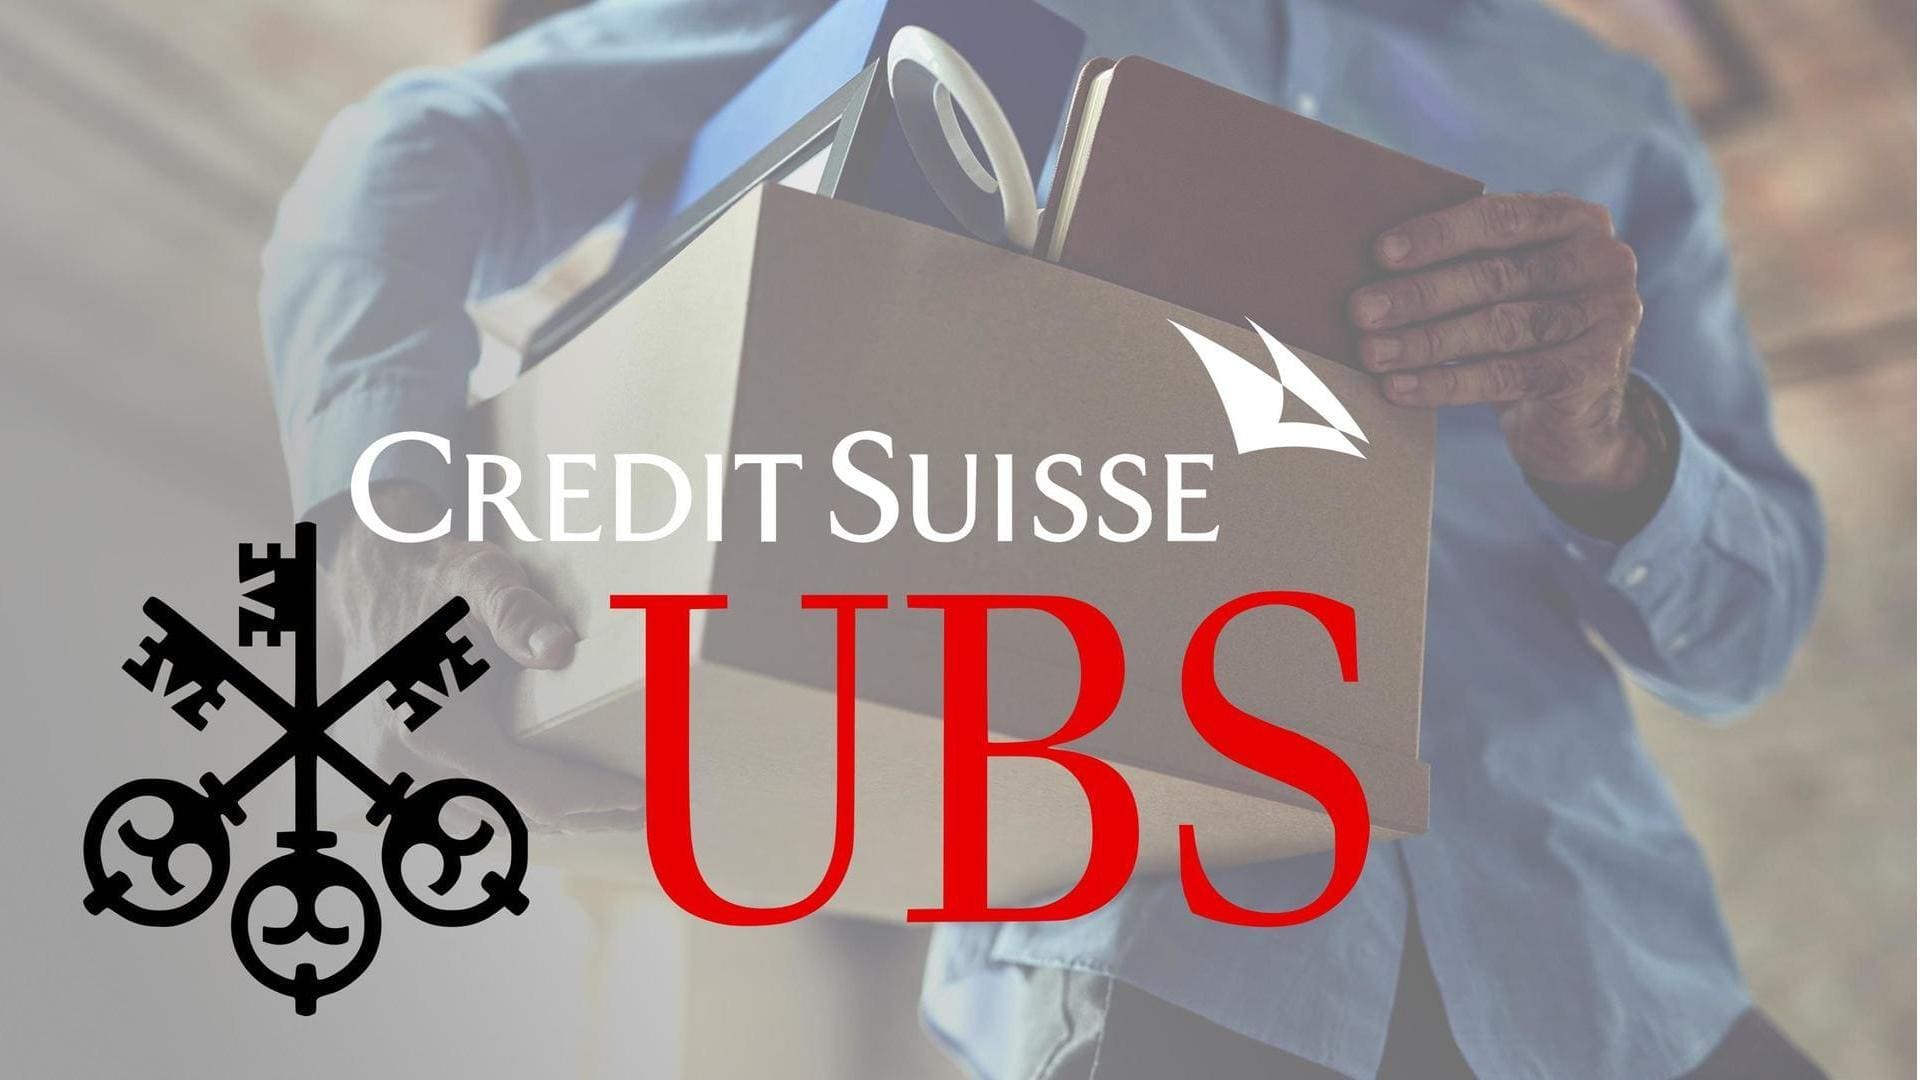 UBS to axe 3,000 employees as it integrates Credit Suisse